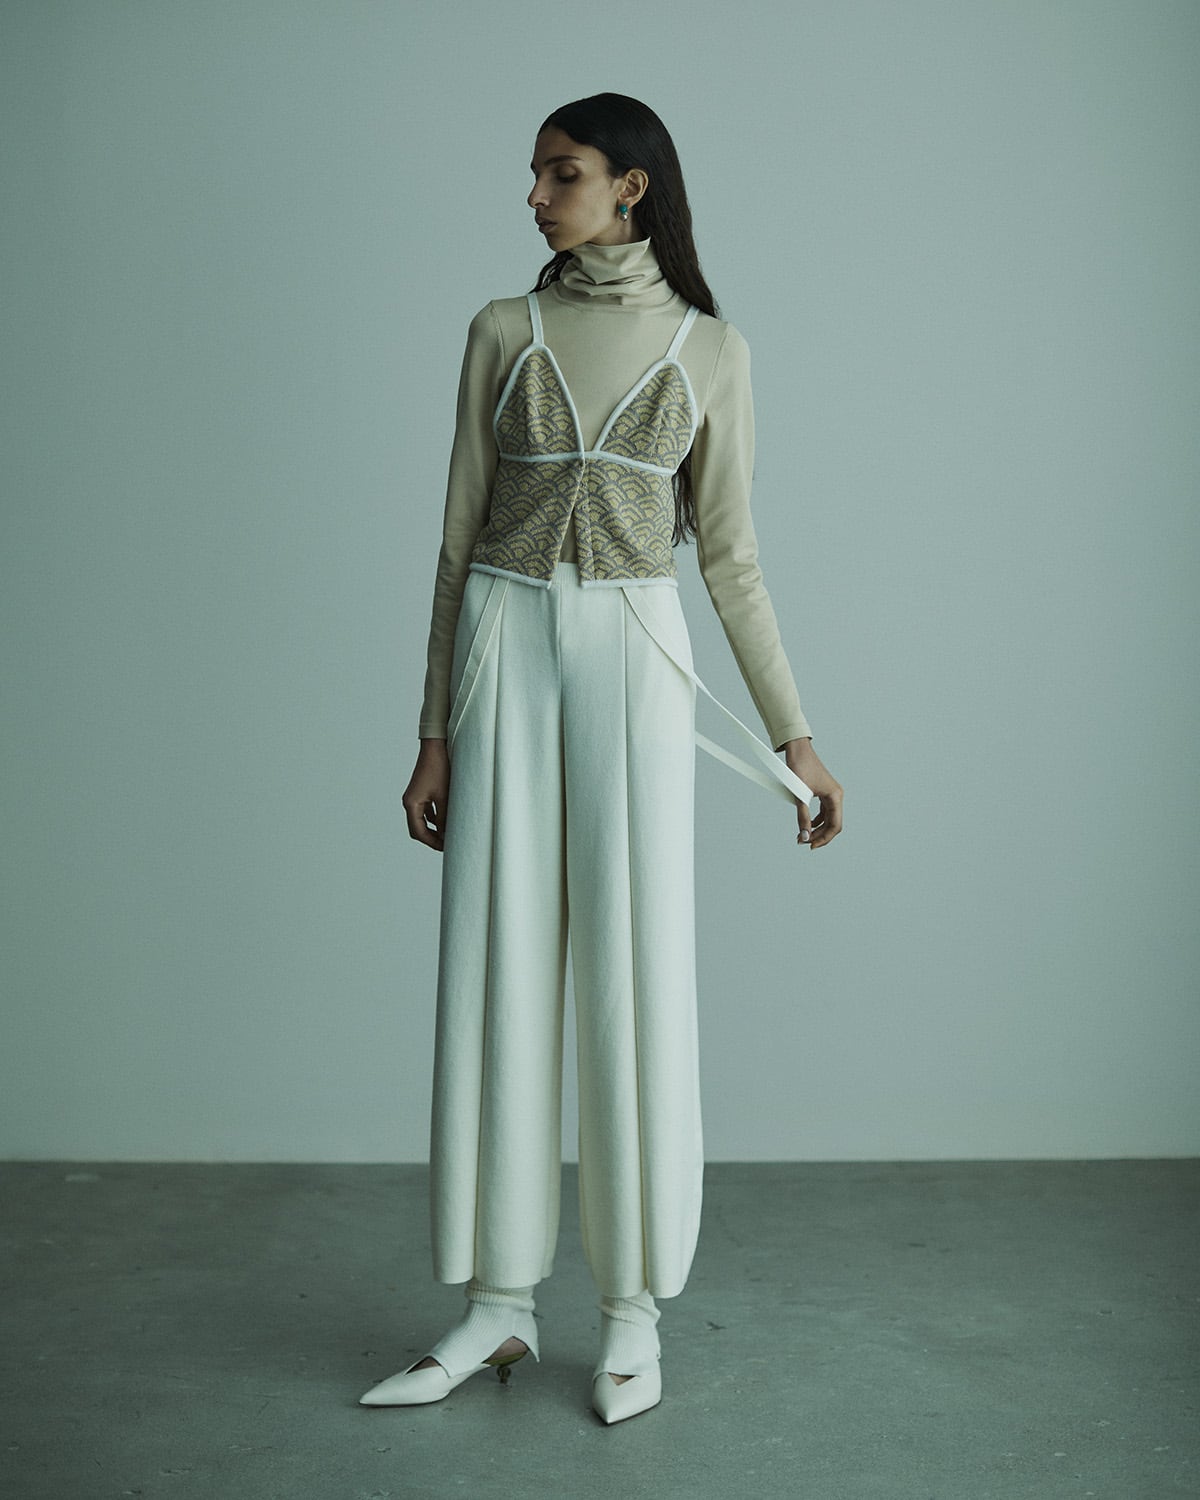 SMOOTH INNER TOPS/TURTLE NECK [IVORY]